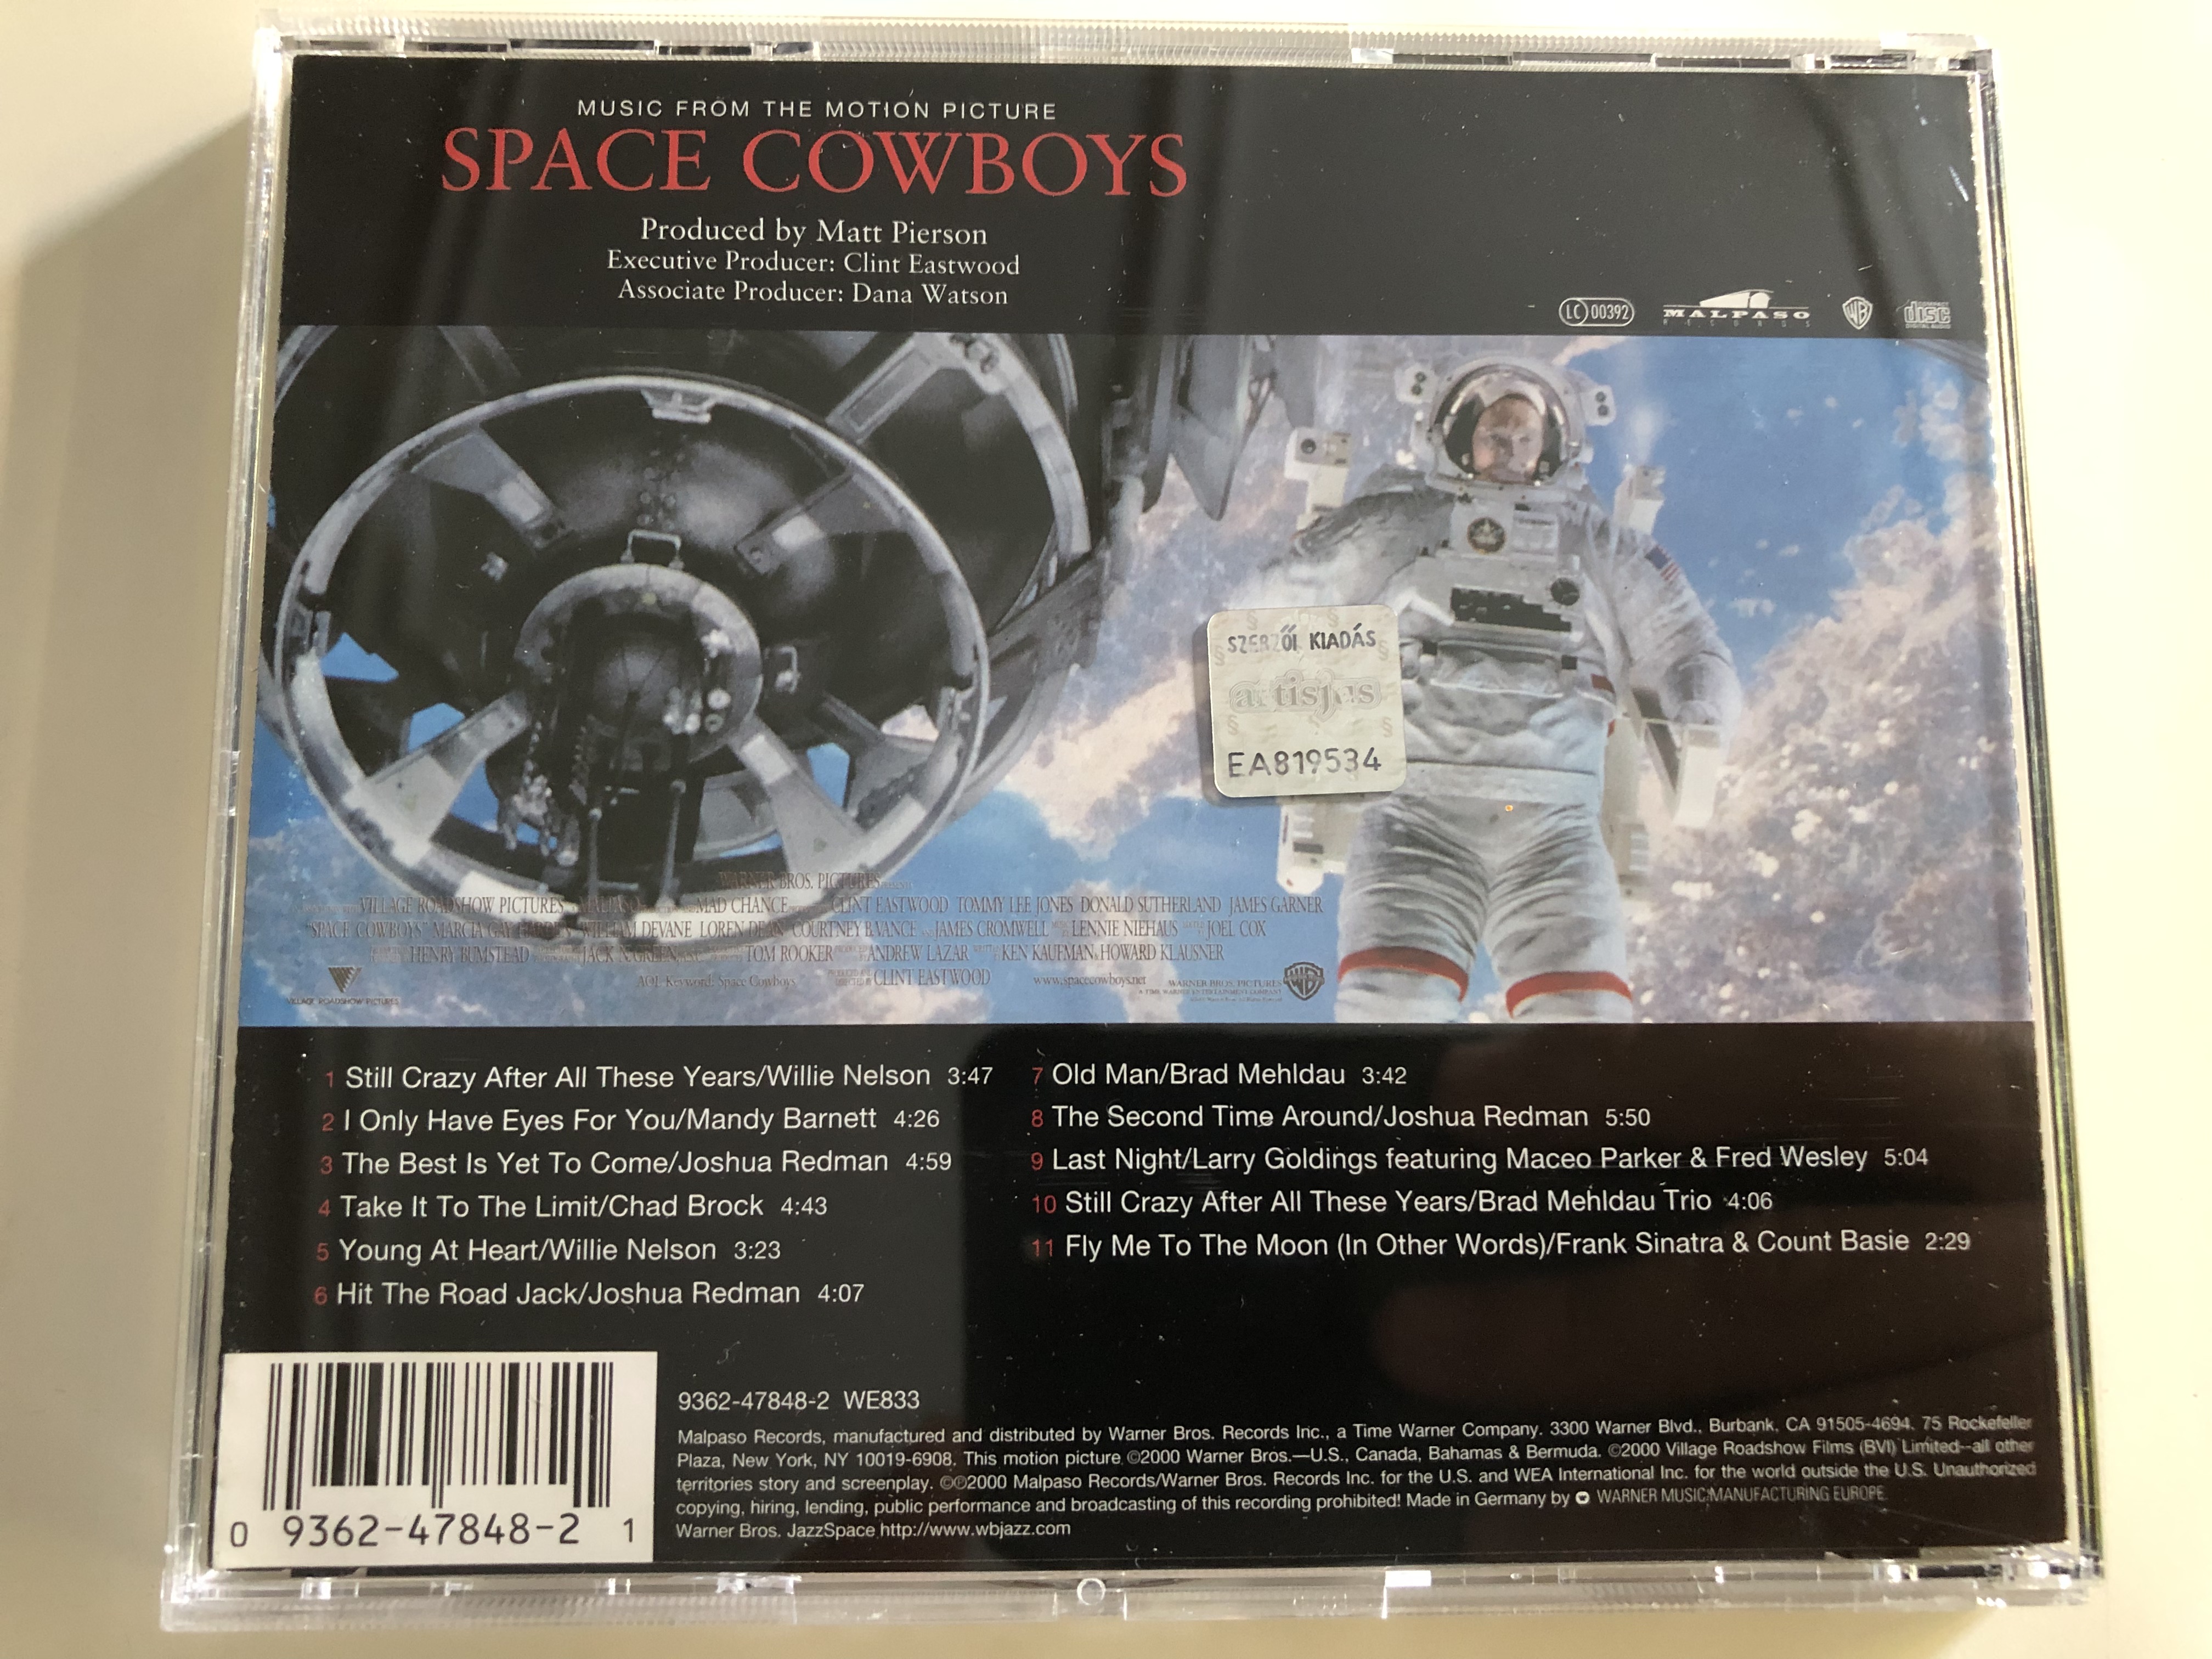 space-cowboys-music-from-the-motion-picture-original-soundtrack-audio-cd-2000-warner-bros-records-we-833-8-.jpg